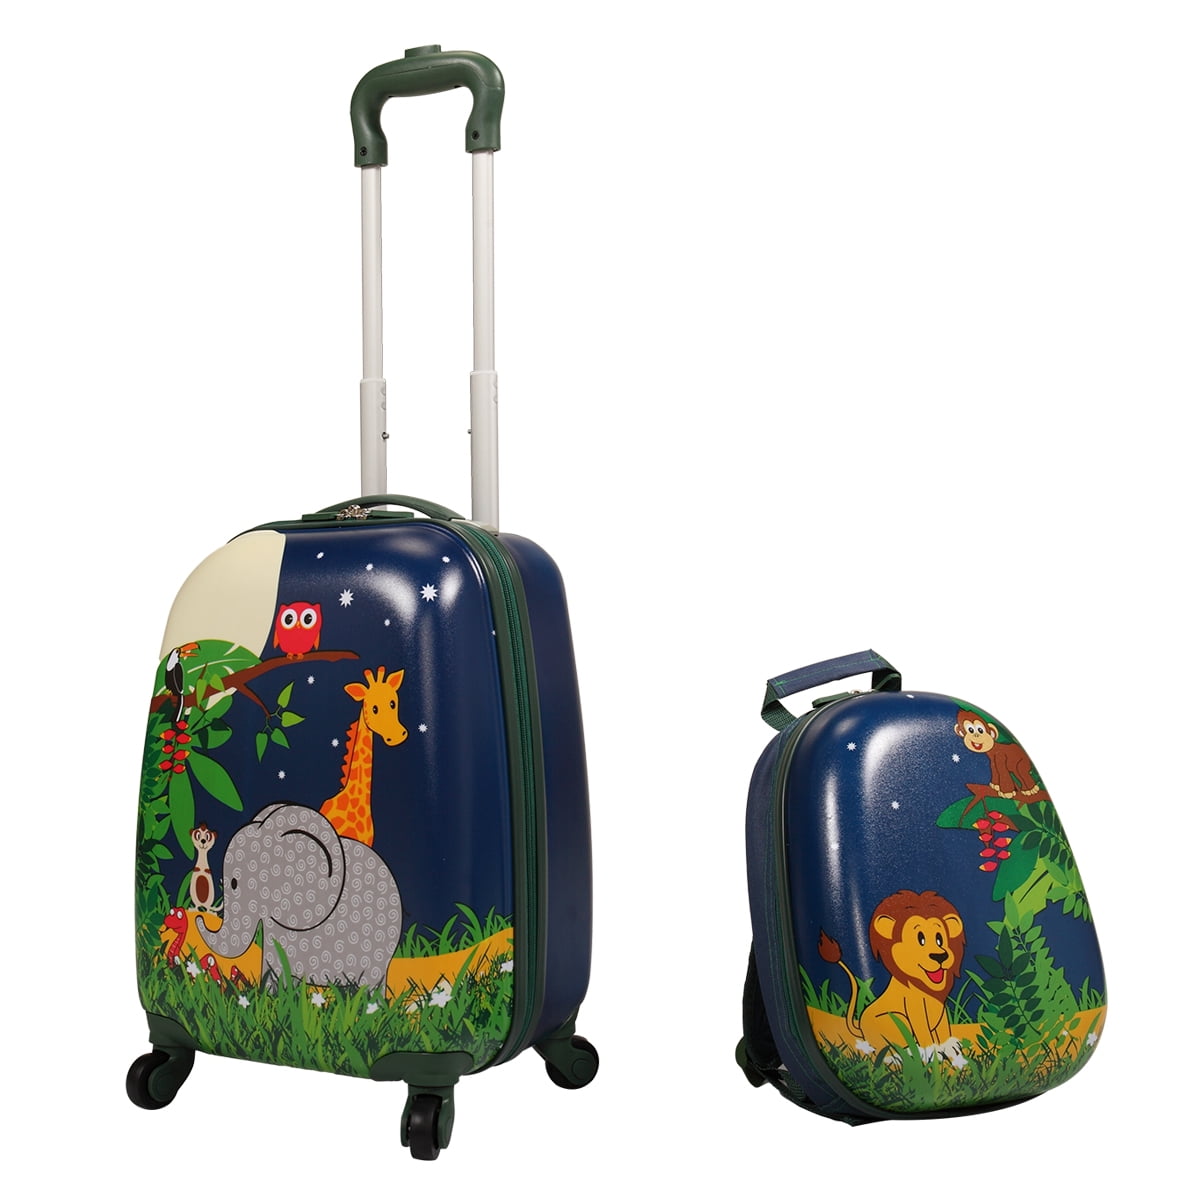 Prettyshop4246 Kid Luggage Suitcase Backpack Adorable Animal Pattern on a Luggage Set of 2 Pcs Kid Suitcase Backpack Multi Wheel Trip Travel Visit Grandparent or Friend School Storage Sturdy Modern